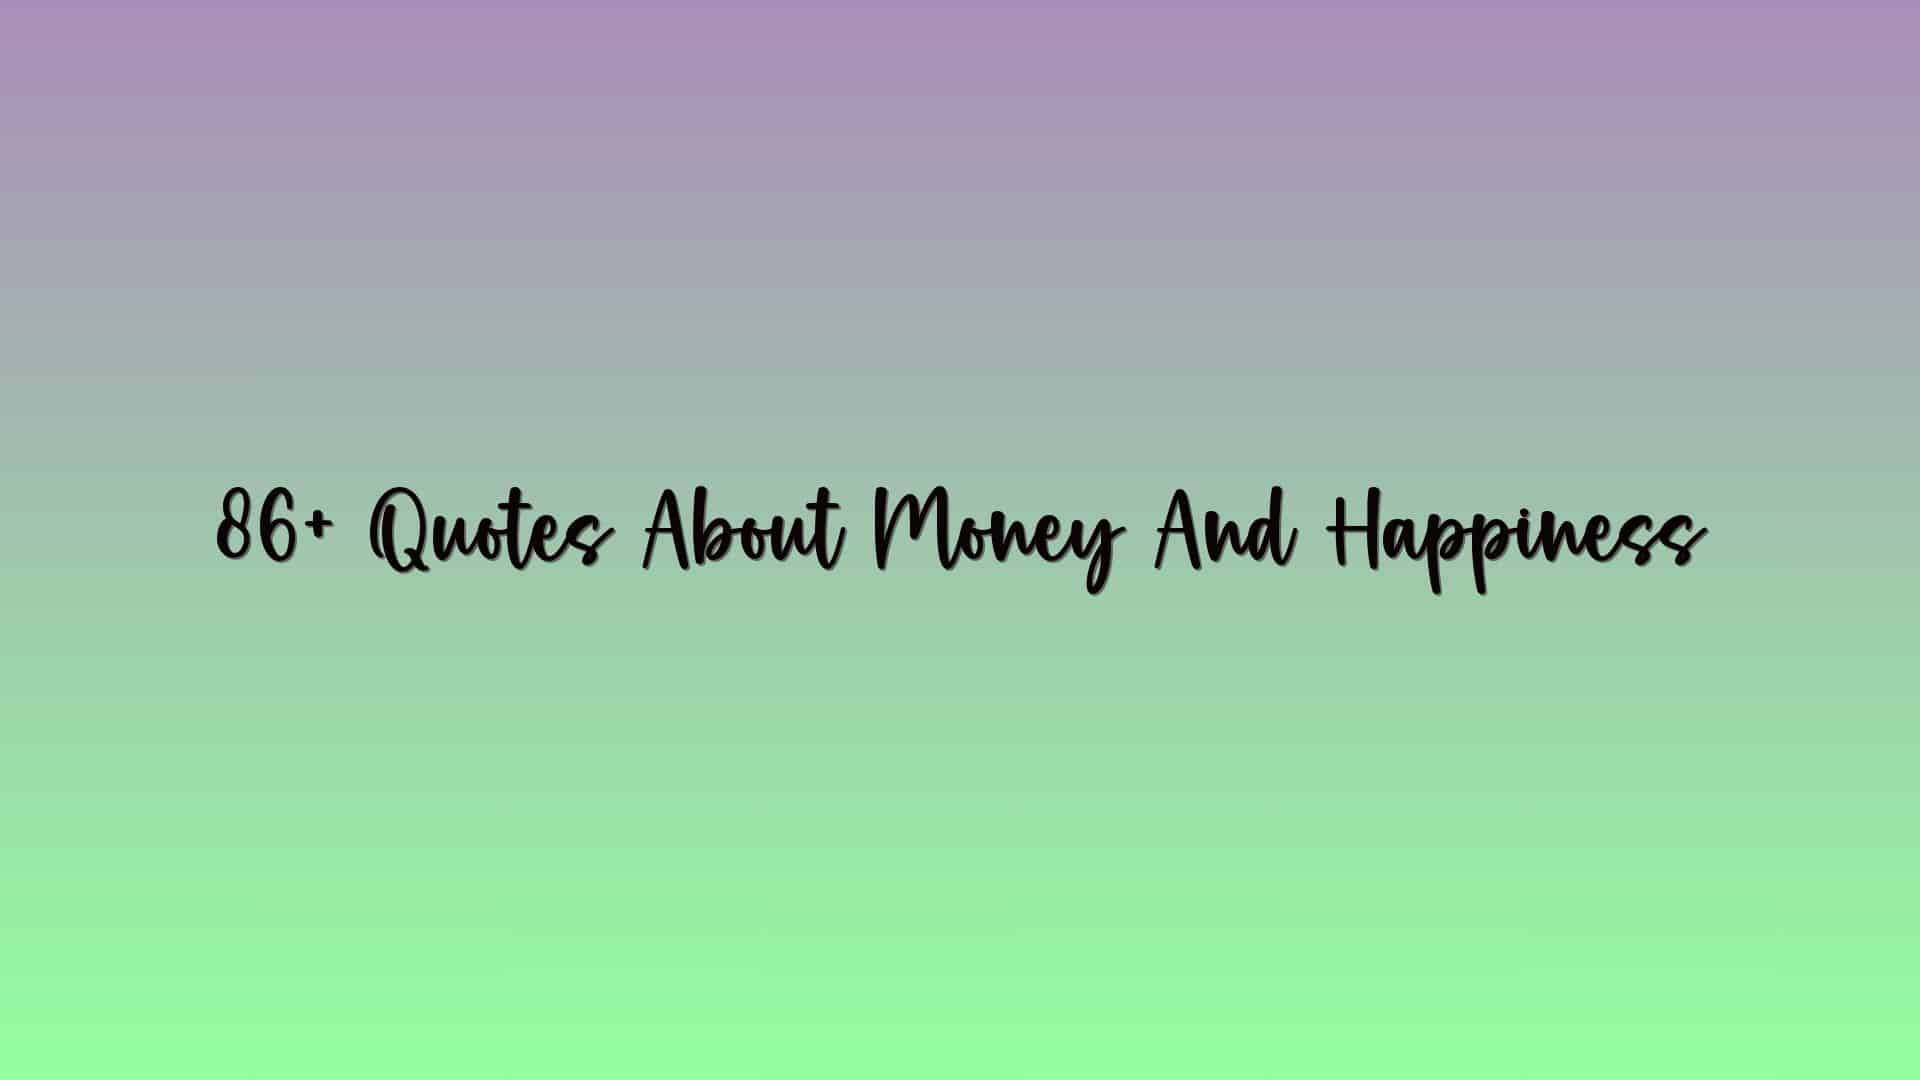 86+ Quotes About Money And Happiness